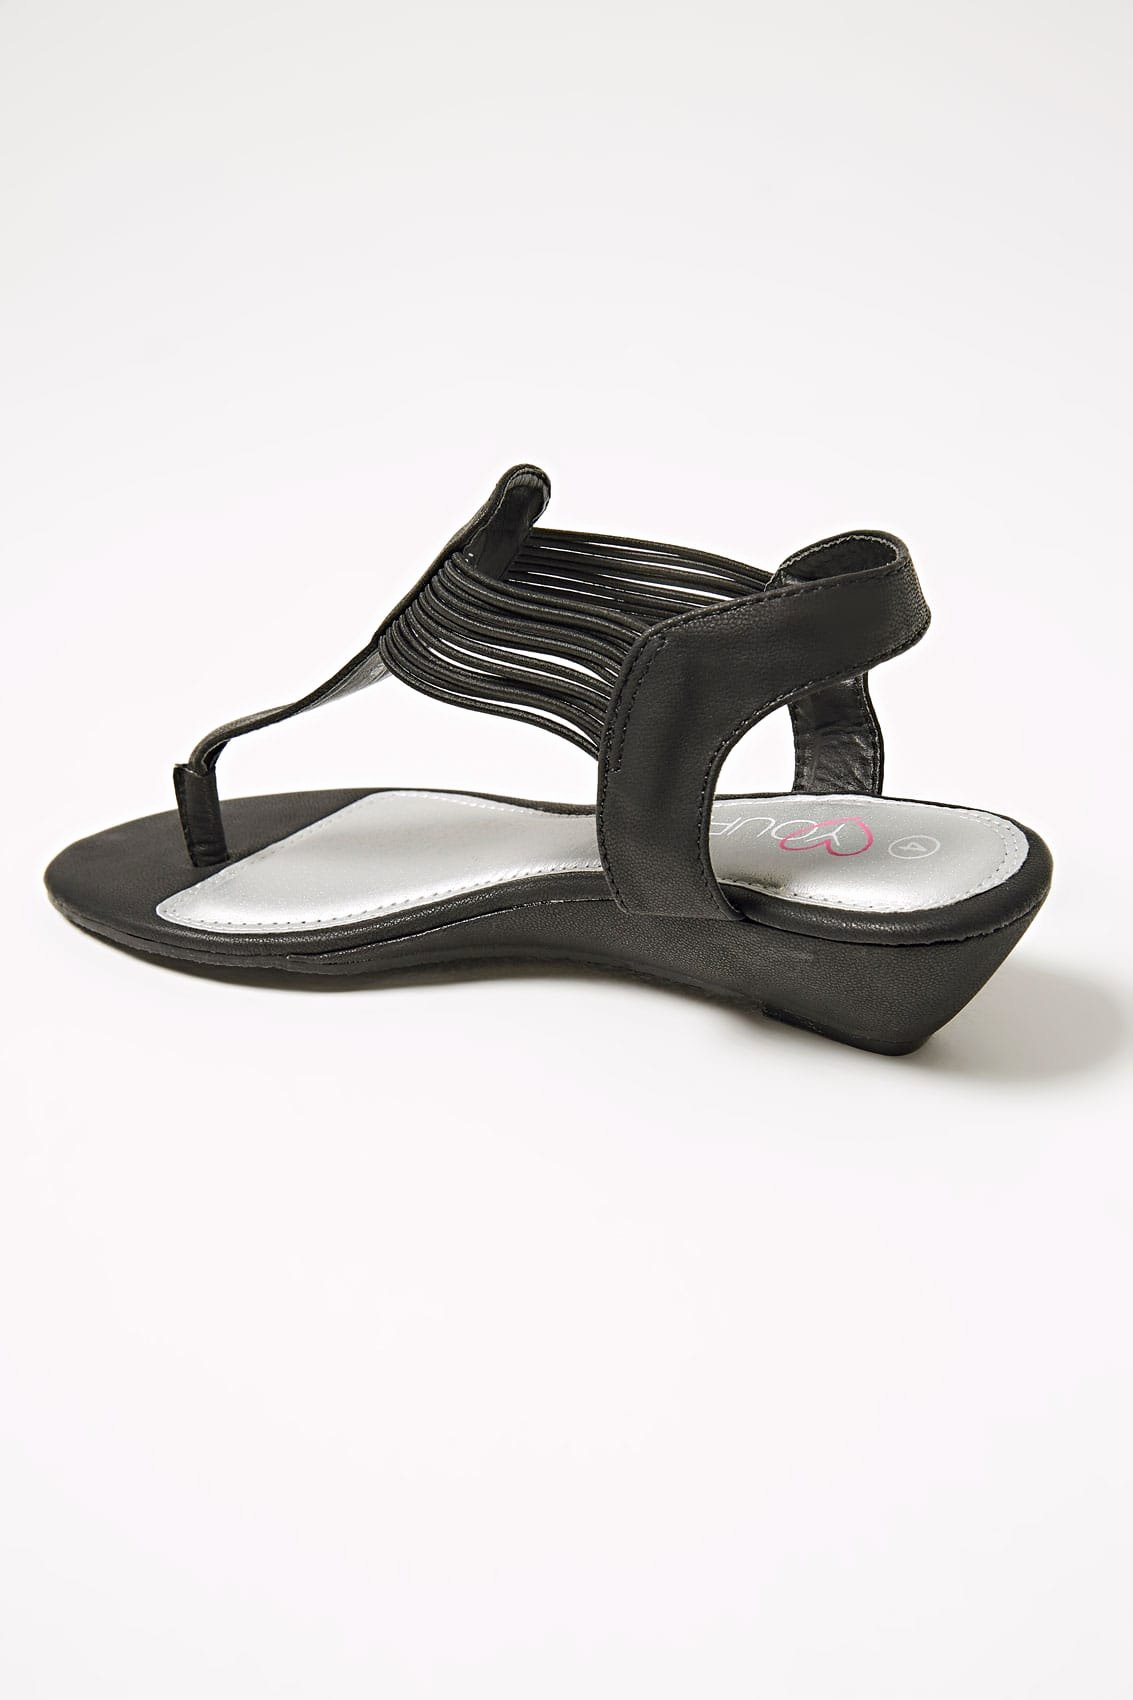 30 Day Review Template Beautiful Black toe Post Wedge Sandal In Eee Fit